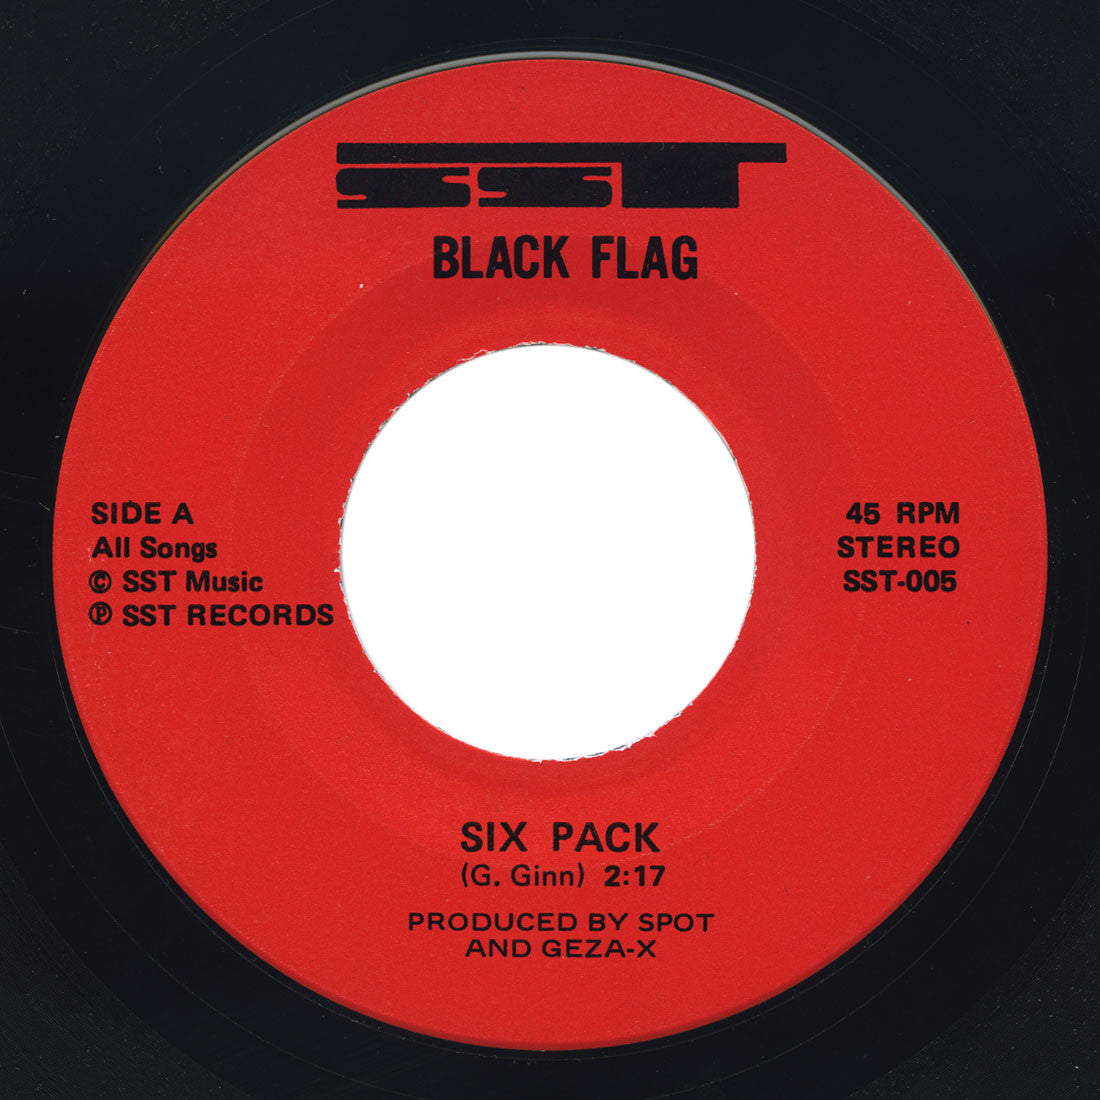 Black Flag Prints – In the Red Records